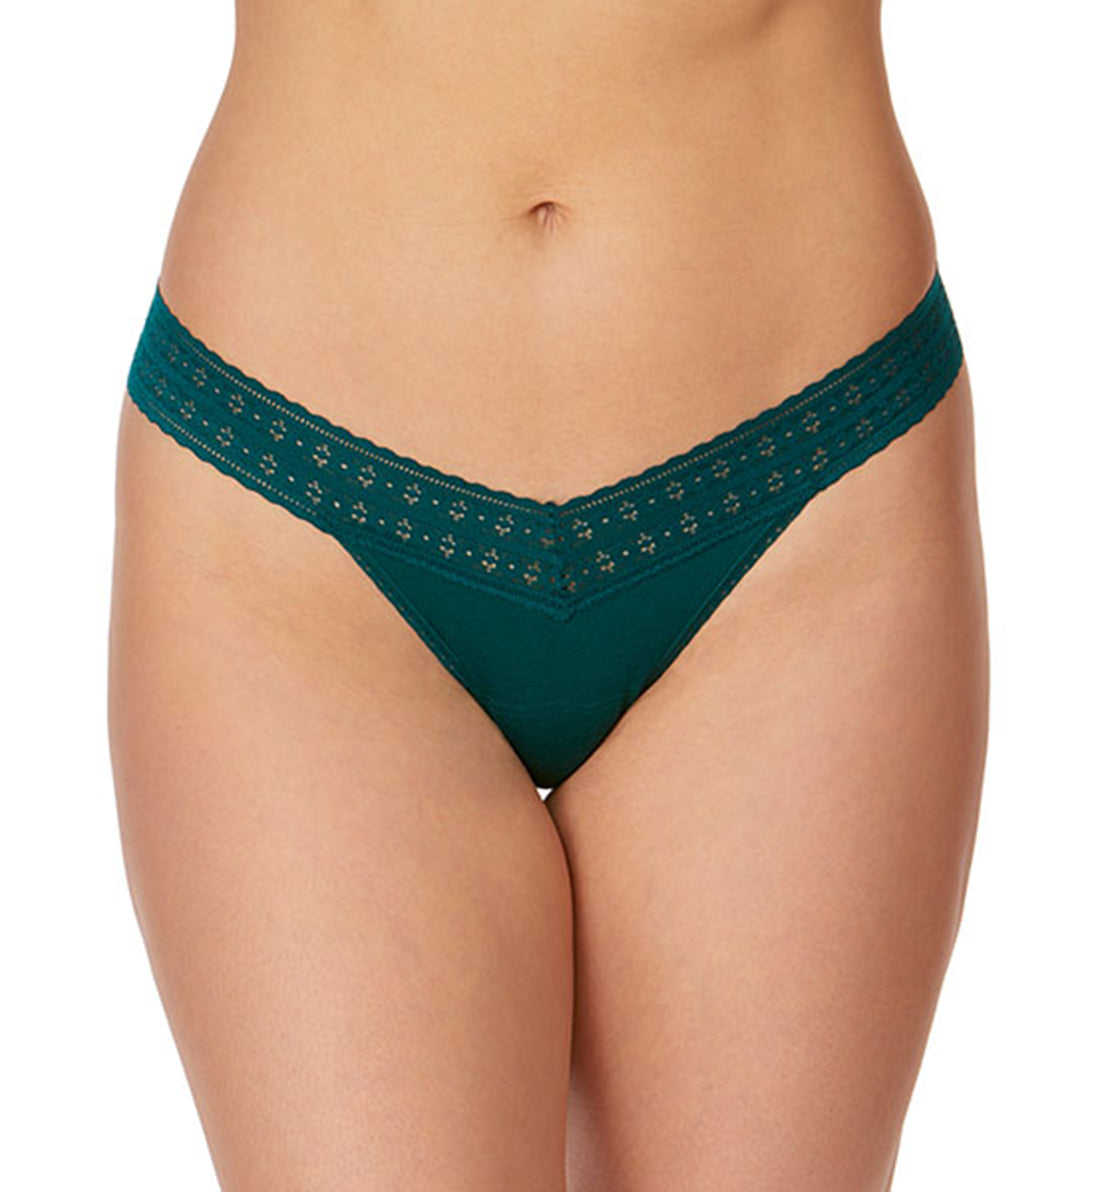 Hanky Panky Dream Low Rise Thong (631004),Ivy - Ivy,One Size